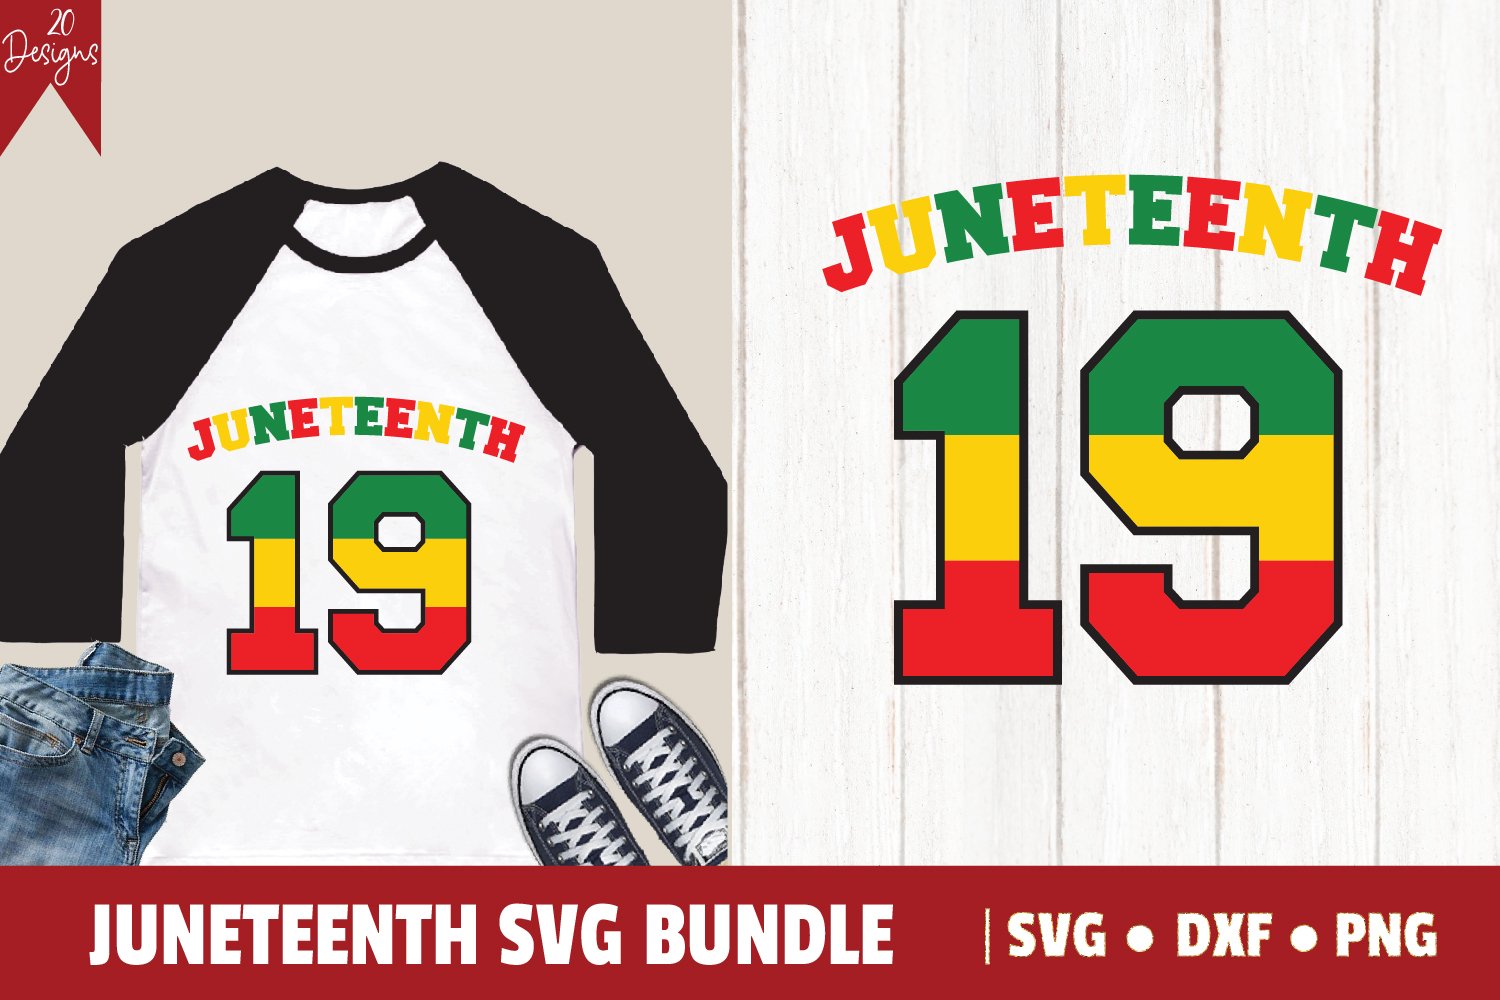 Juneteenth design for clothes.